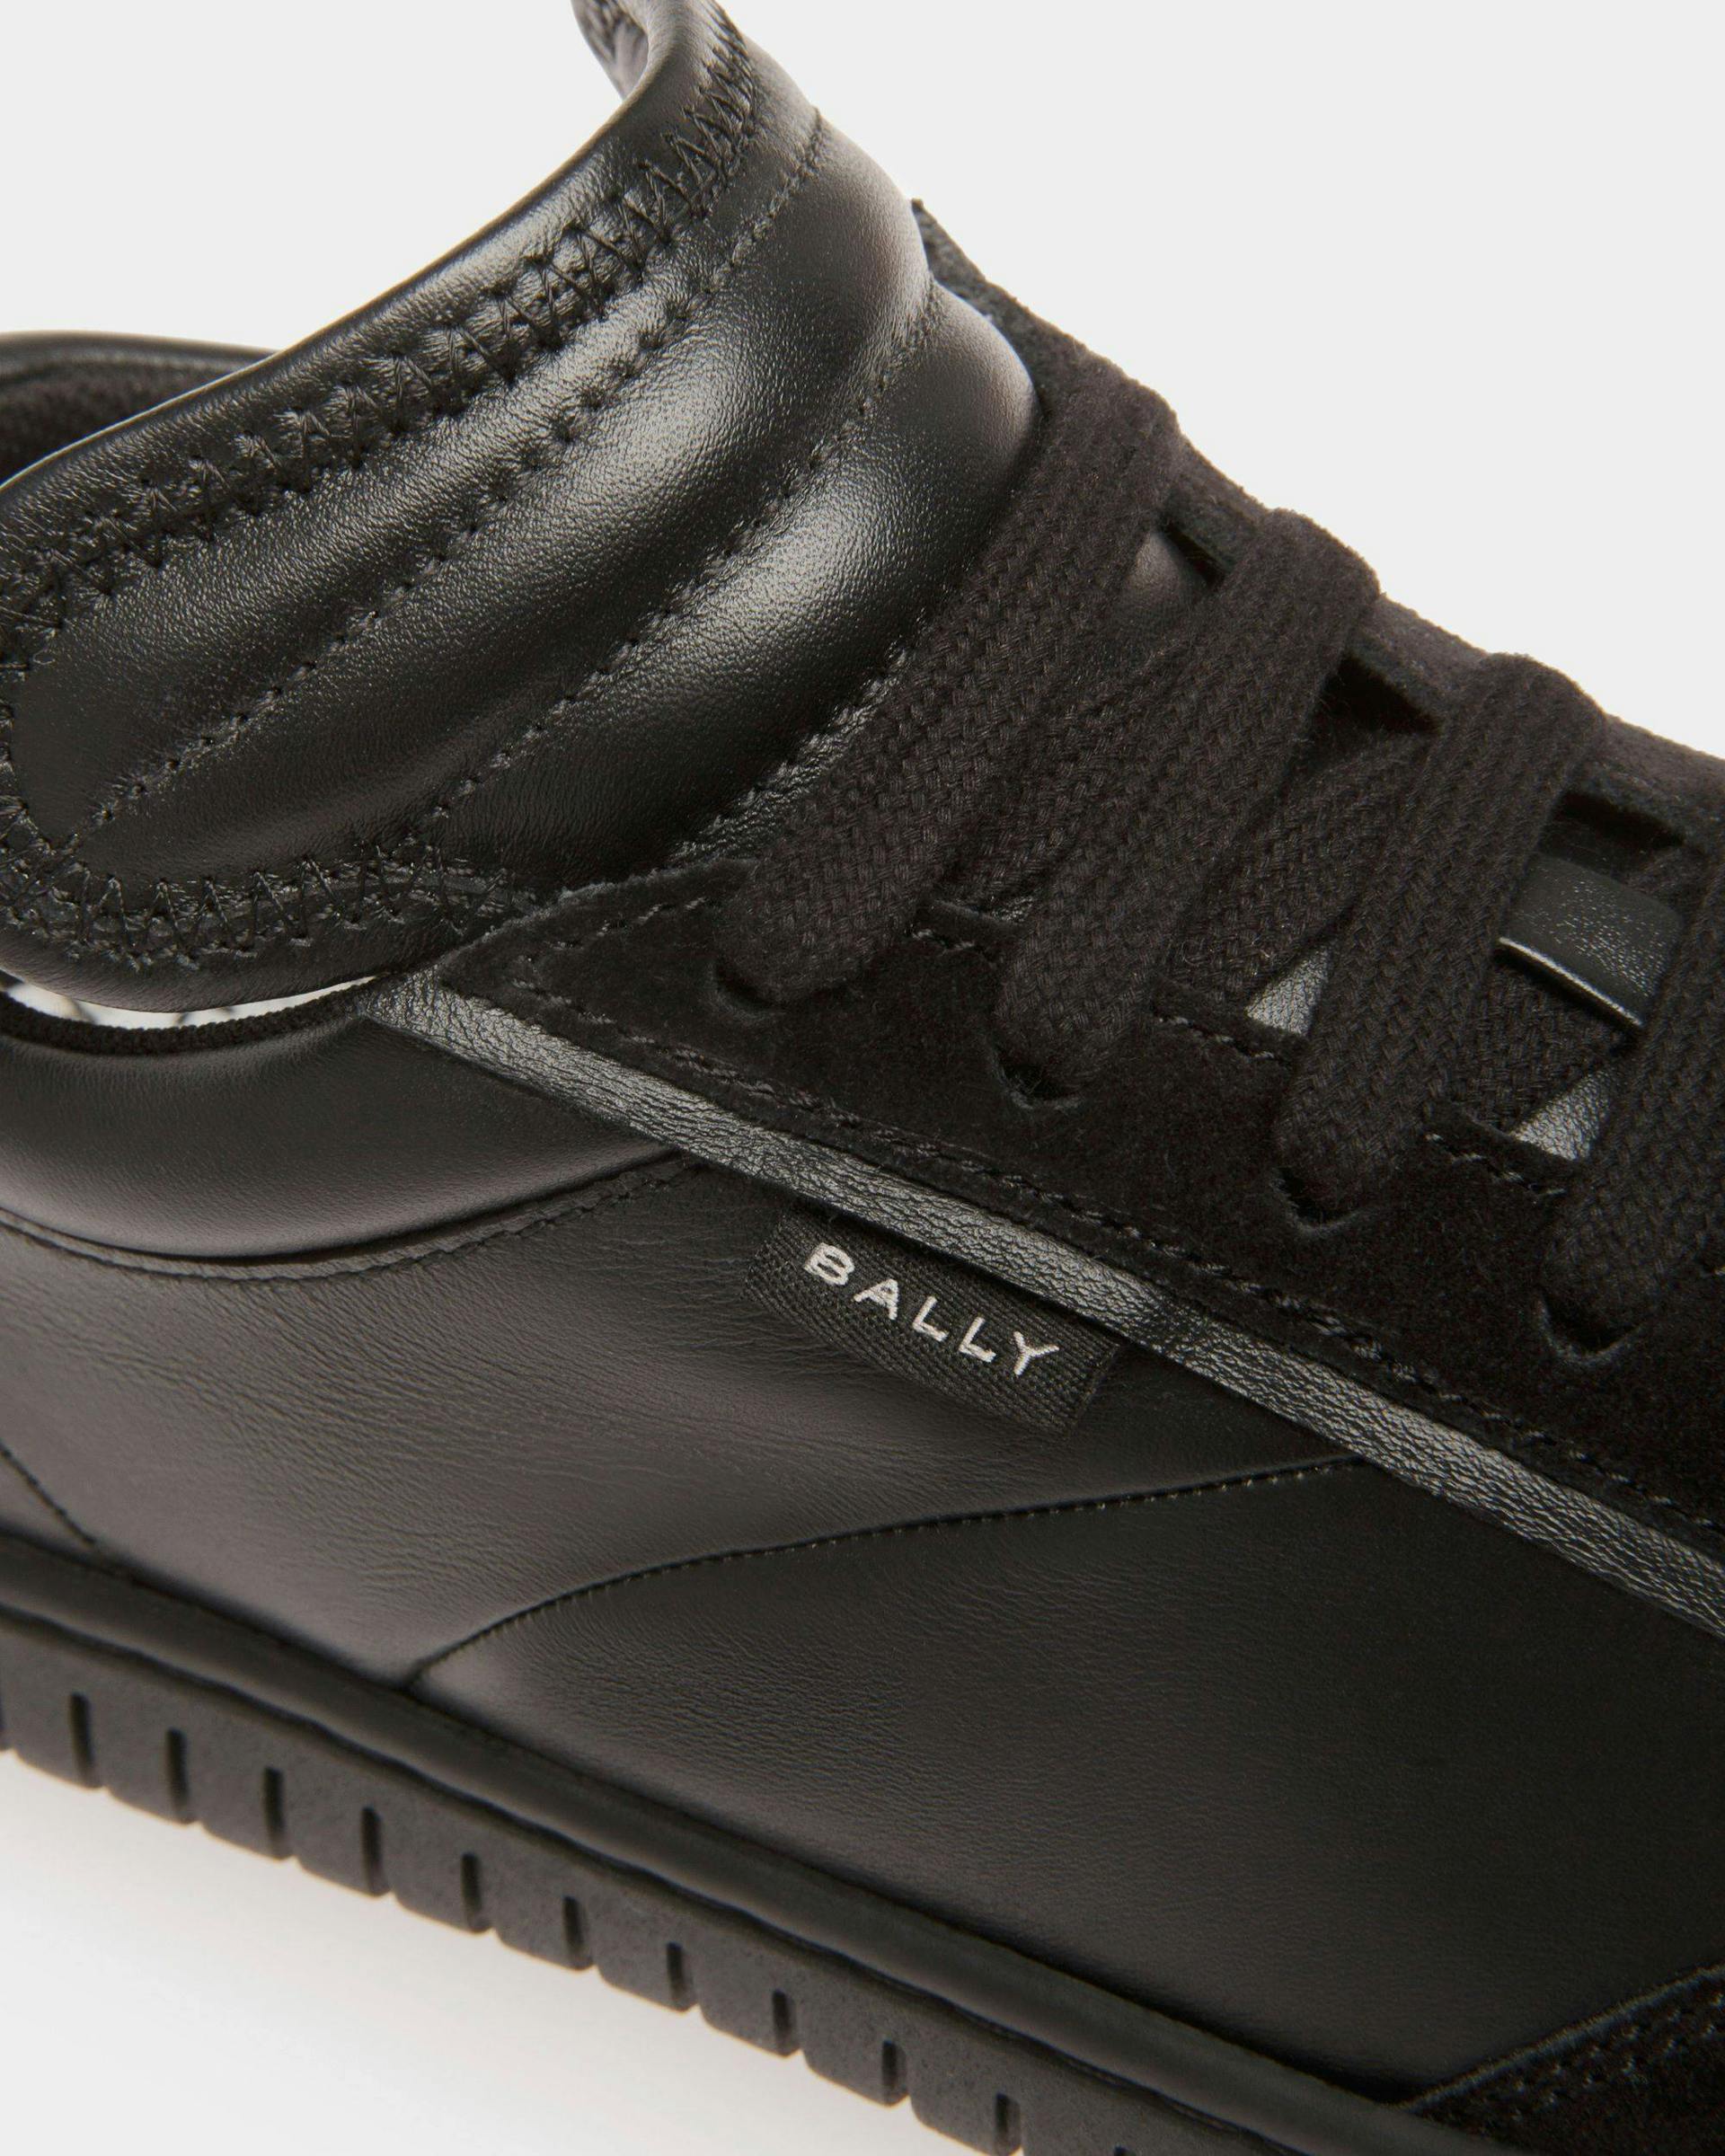 Women's Player Sneakers In Black Leather | Bally | Still Life Detail